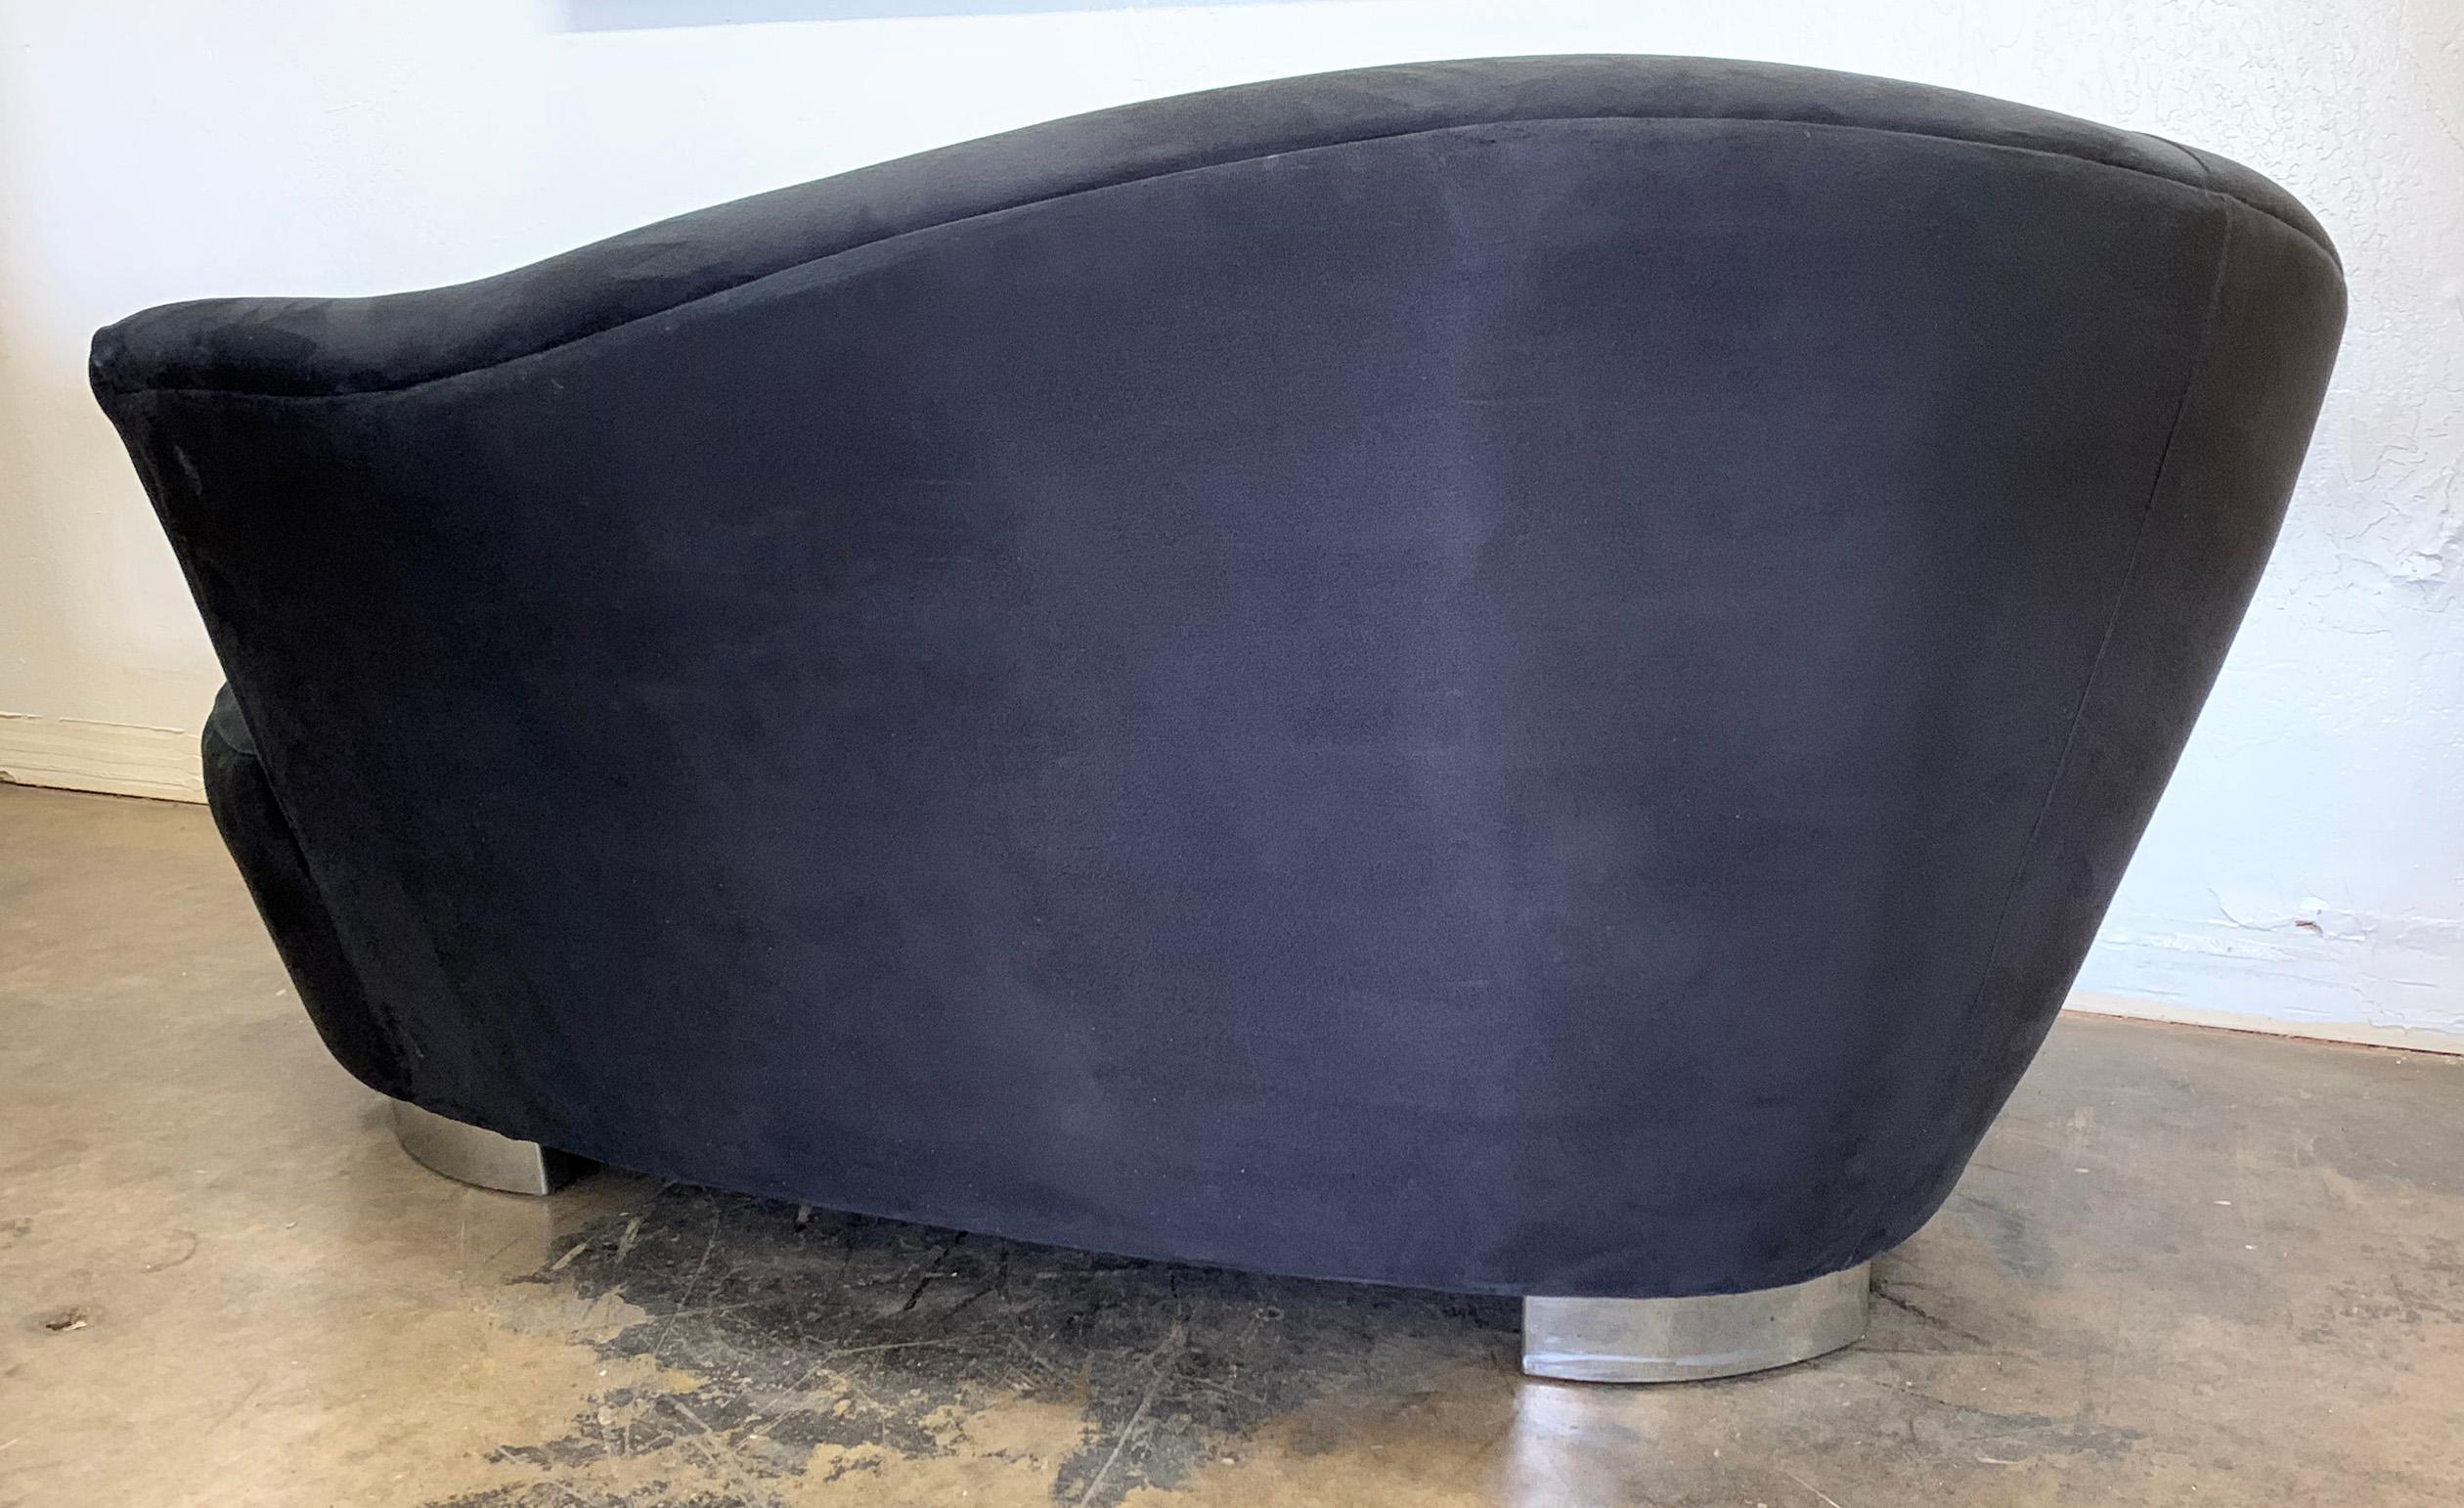 An absolutely stunning petite cloud sofa by Vladimir Kagan. This cloud sofa features Kagan's Classic biomorphic shape with the chrome teeth feet that give it a floating effect as if it were a cloud.

The upholstery on this piece is a black